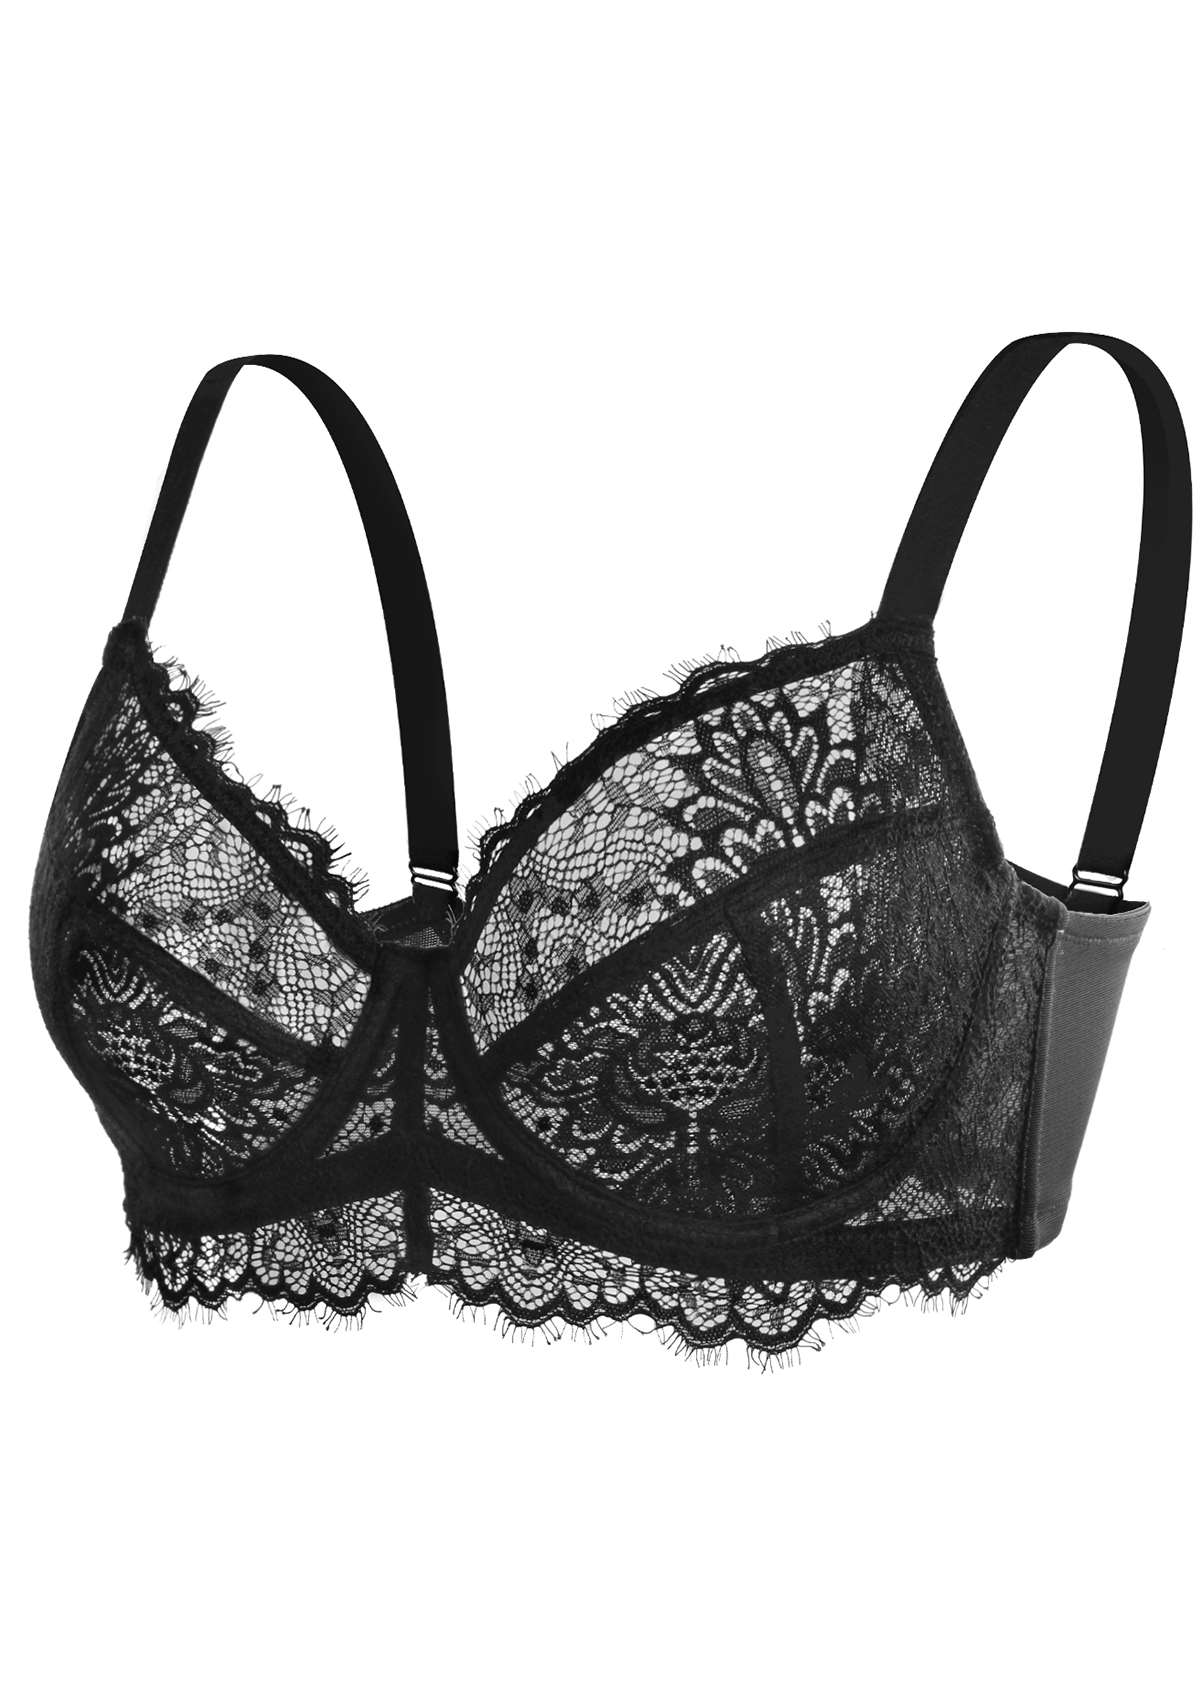 HSIA Sunflower Matching Bra And Underwear: Back And Side Smoothing Bra - Black / 38 / G